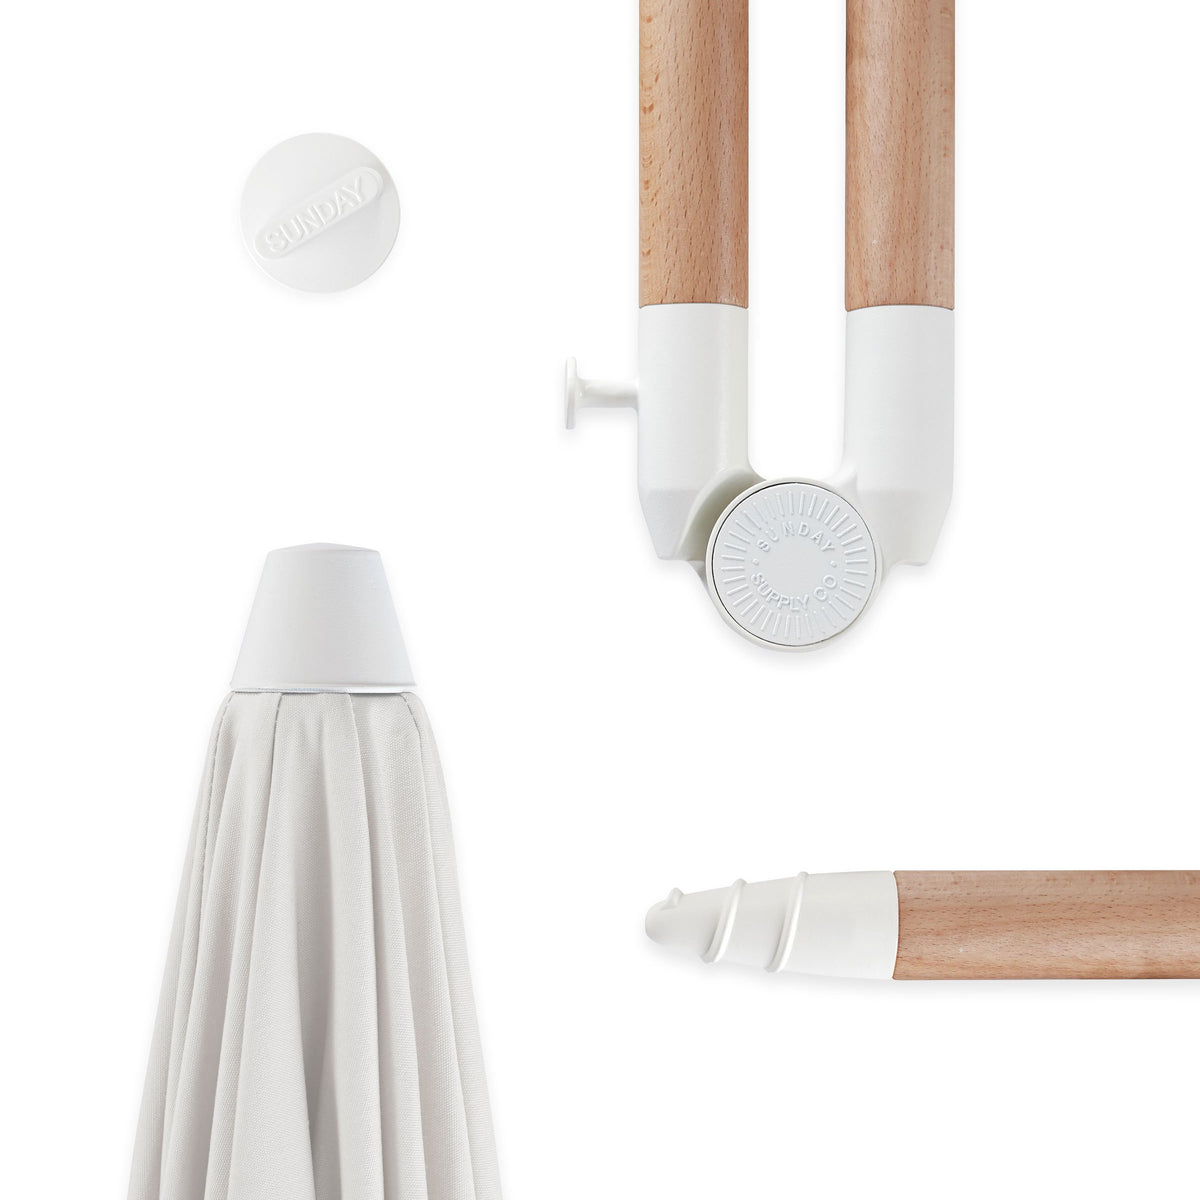 Close up on a Sunday Supply Co beach umbrella's joints and hardware details.